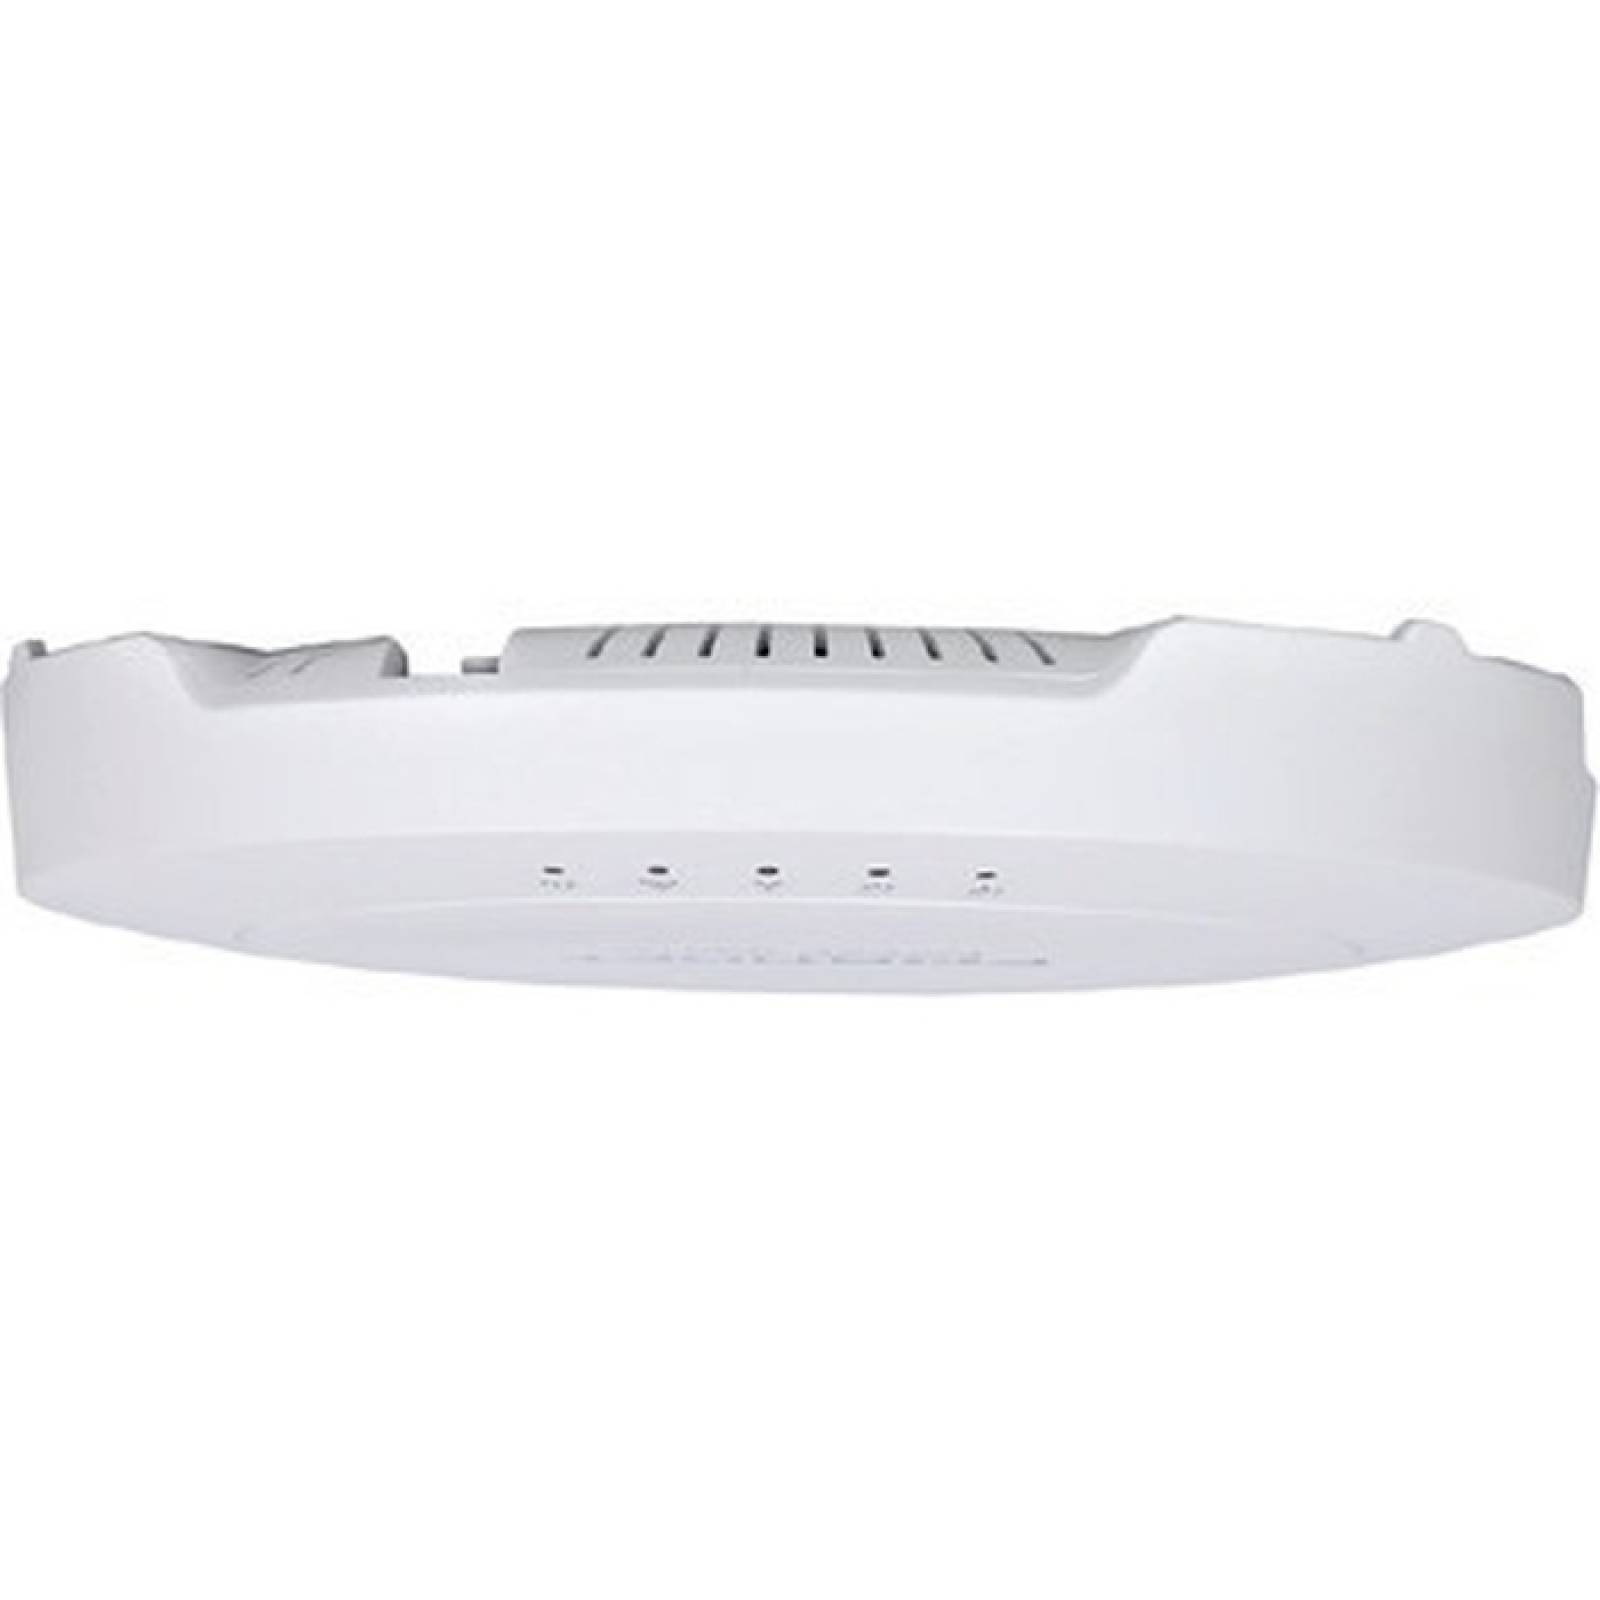 Fortinet FortiAP FAPS321C Punto de acceso inalmbrico IEEE 80211ac a 127 Gbit  s